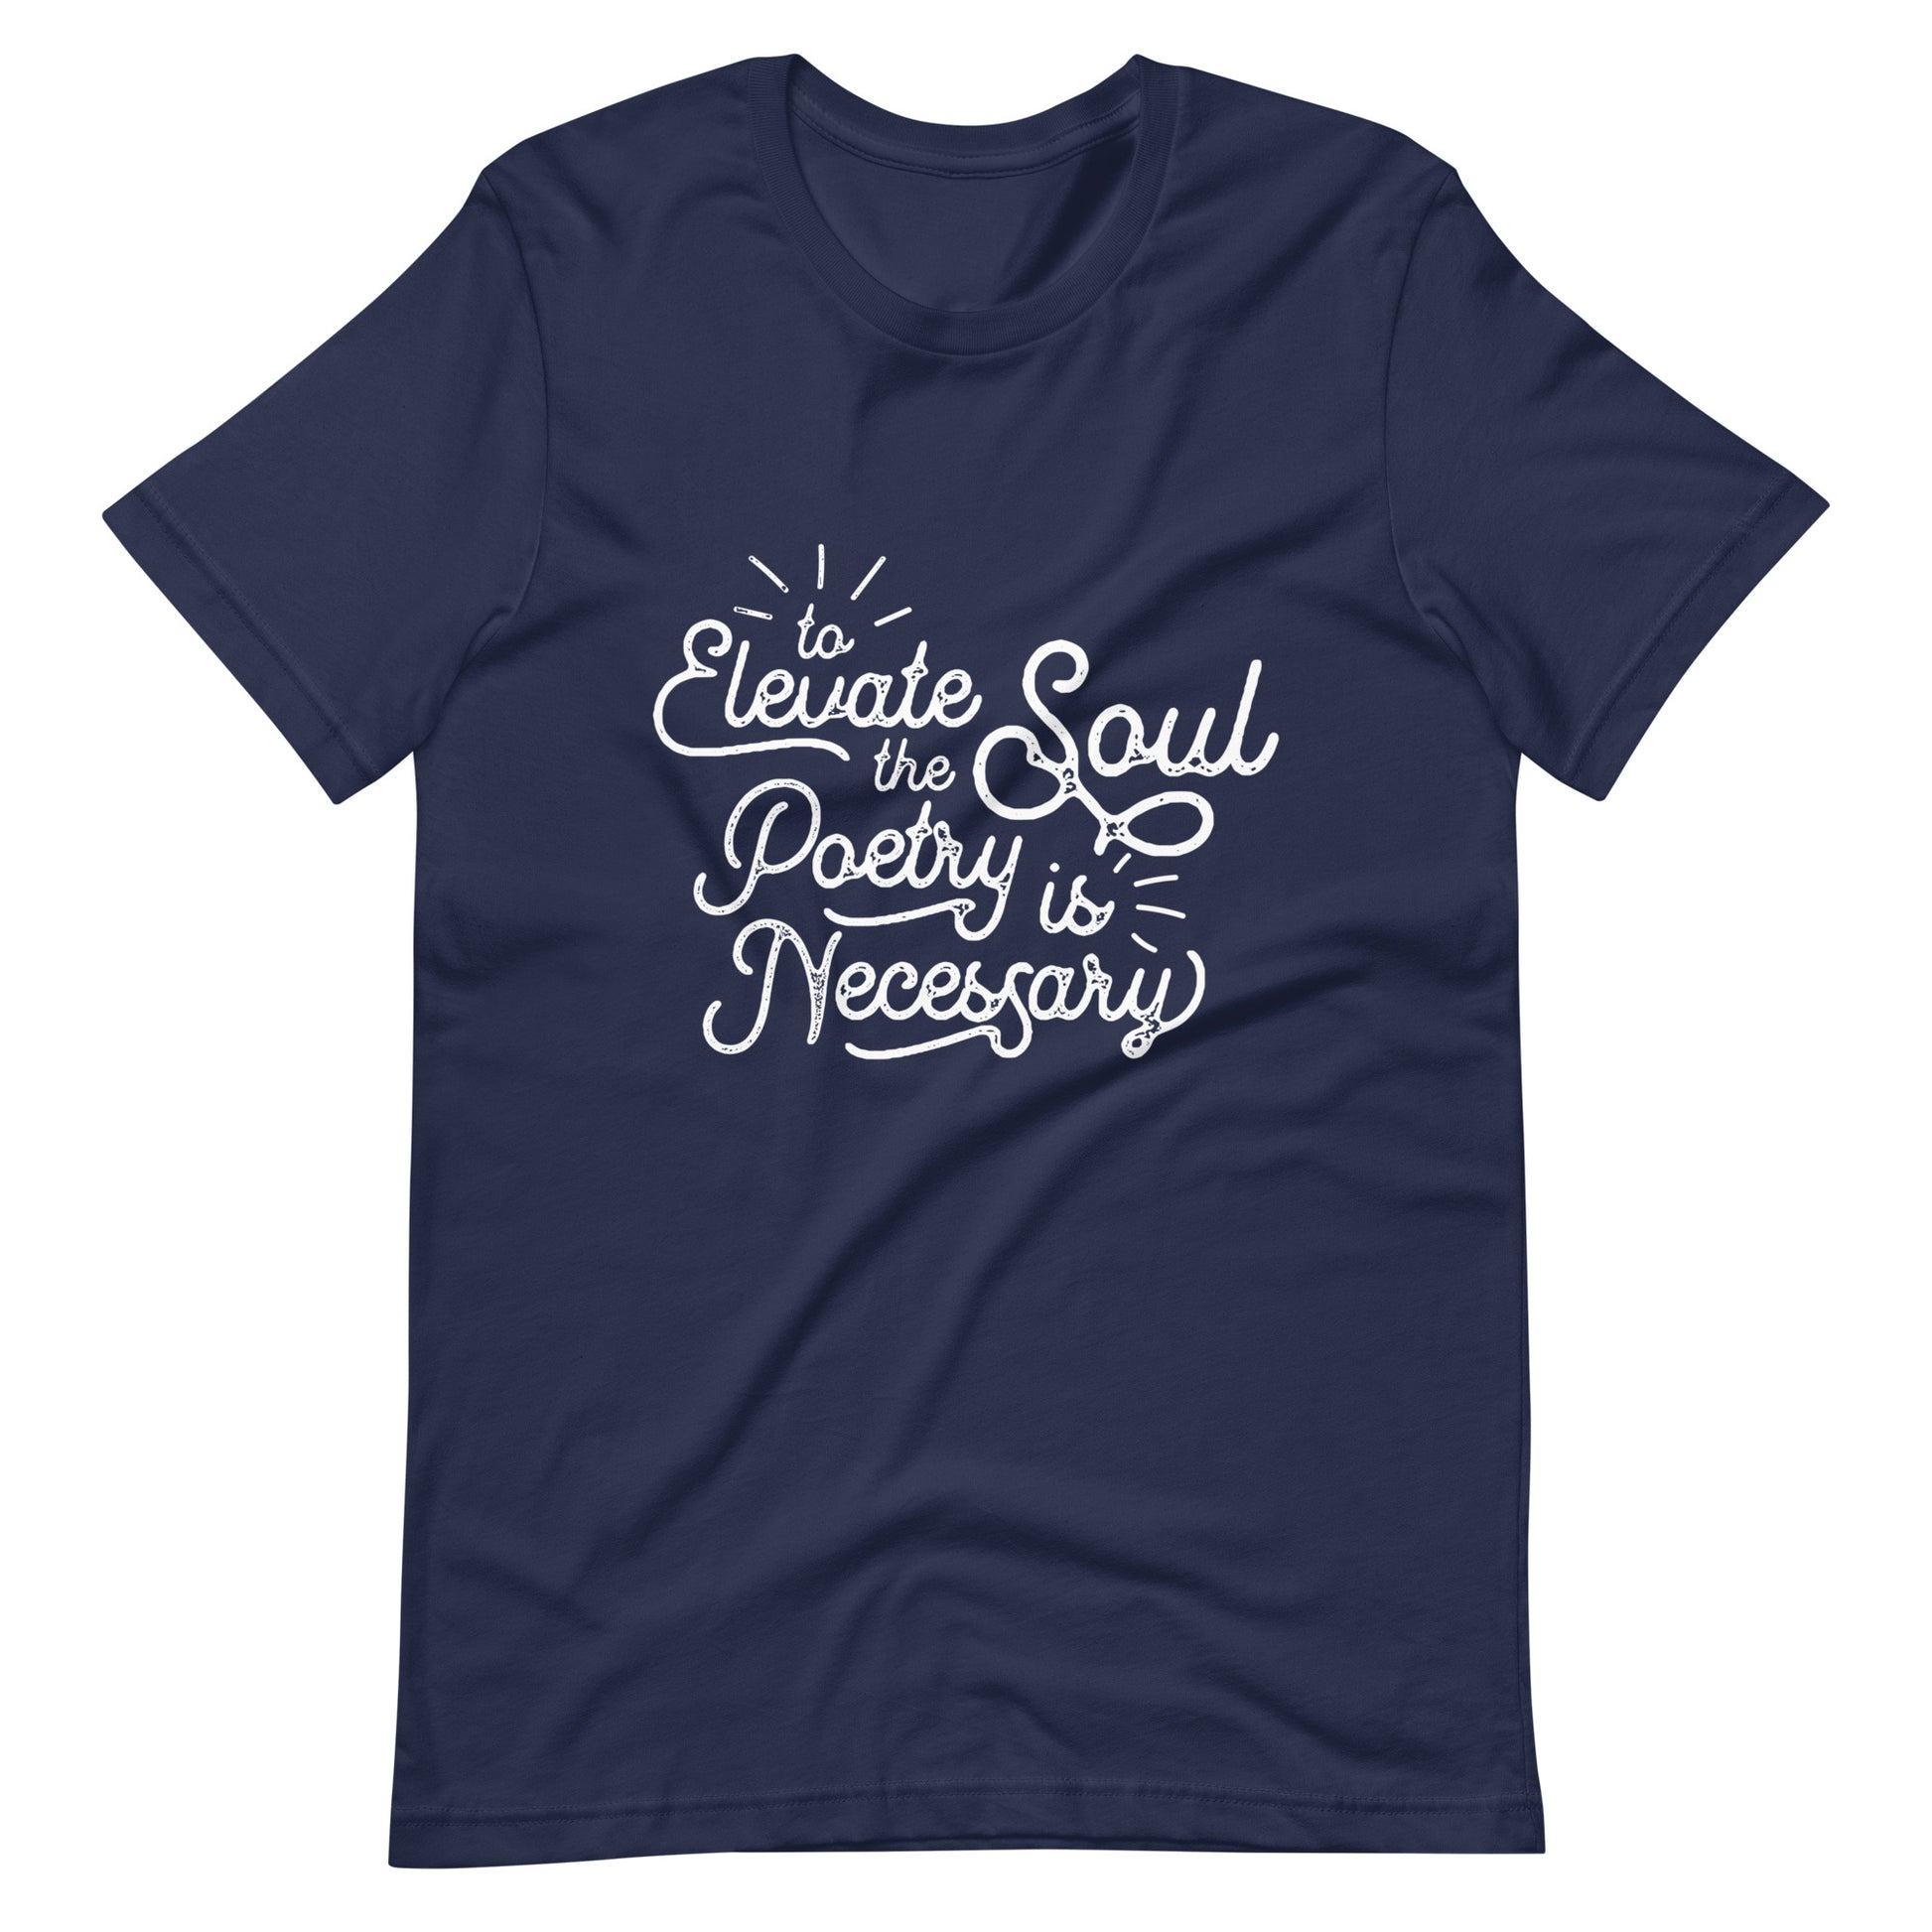 To Elevate the Soul Edgar Allan Poe Quote - Men's t-shirt - Navy Front